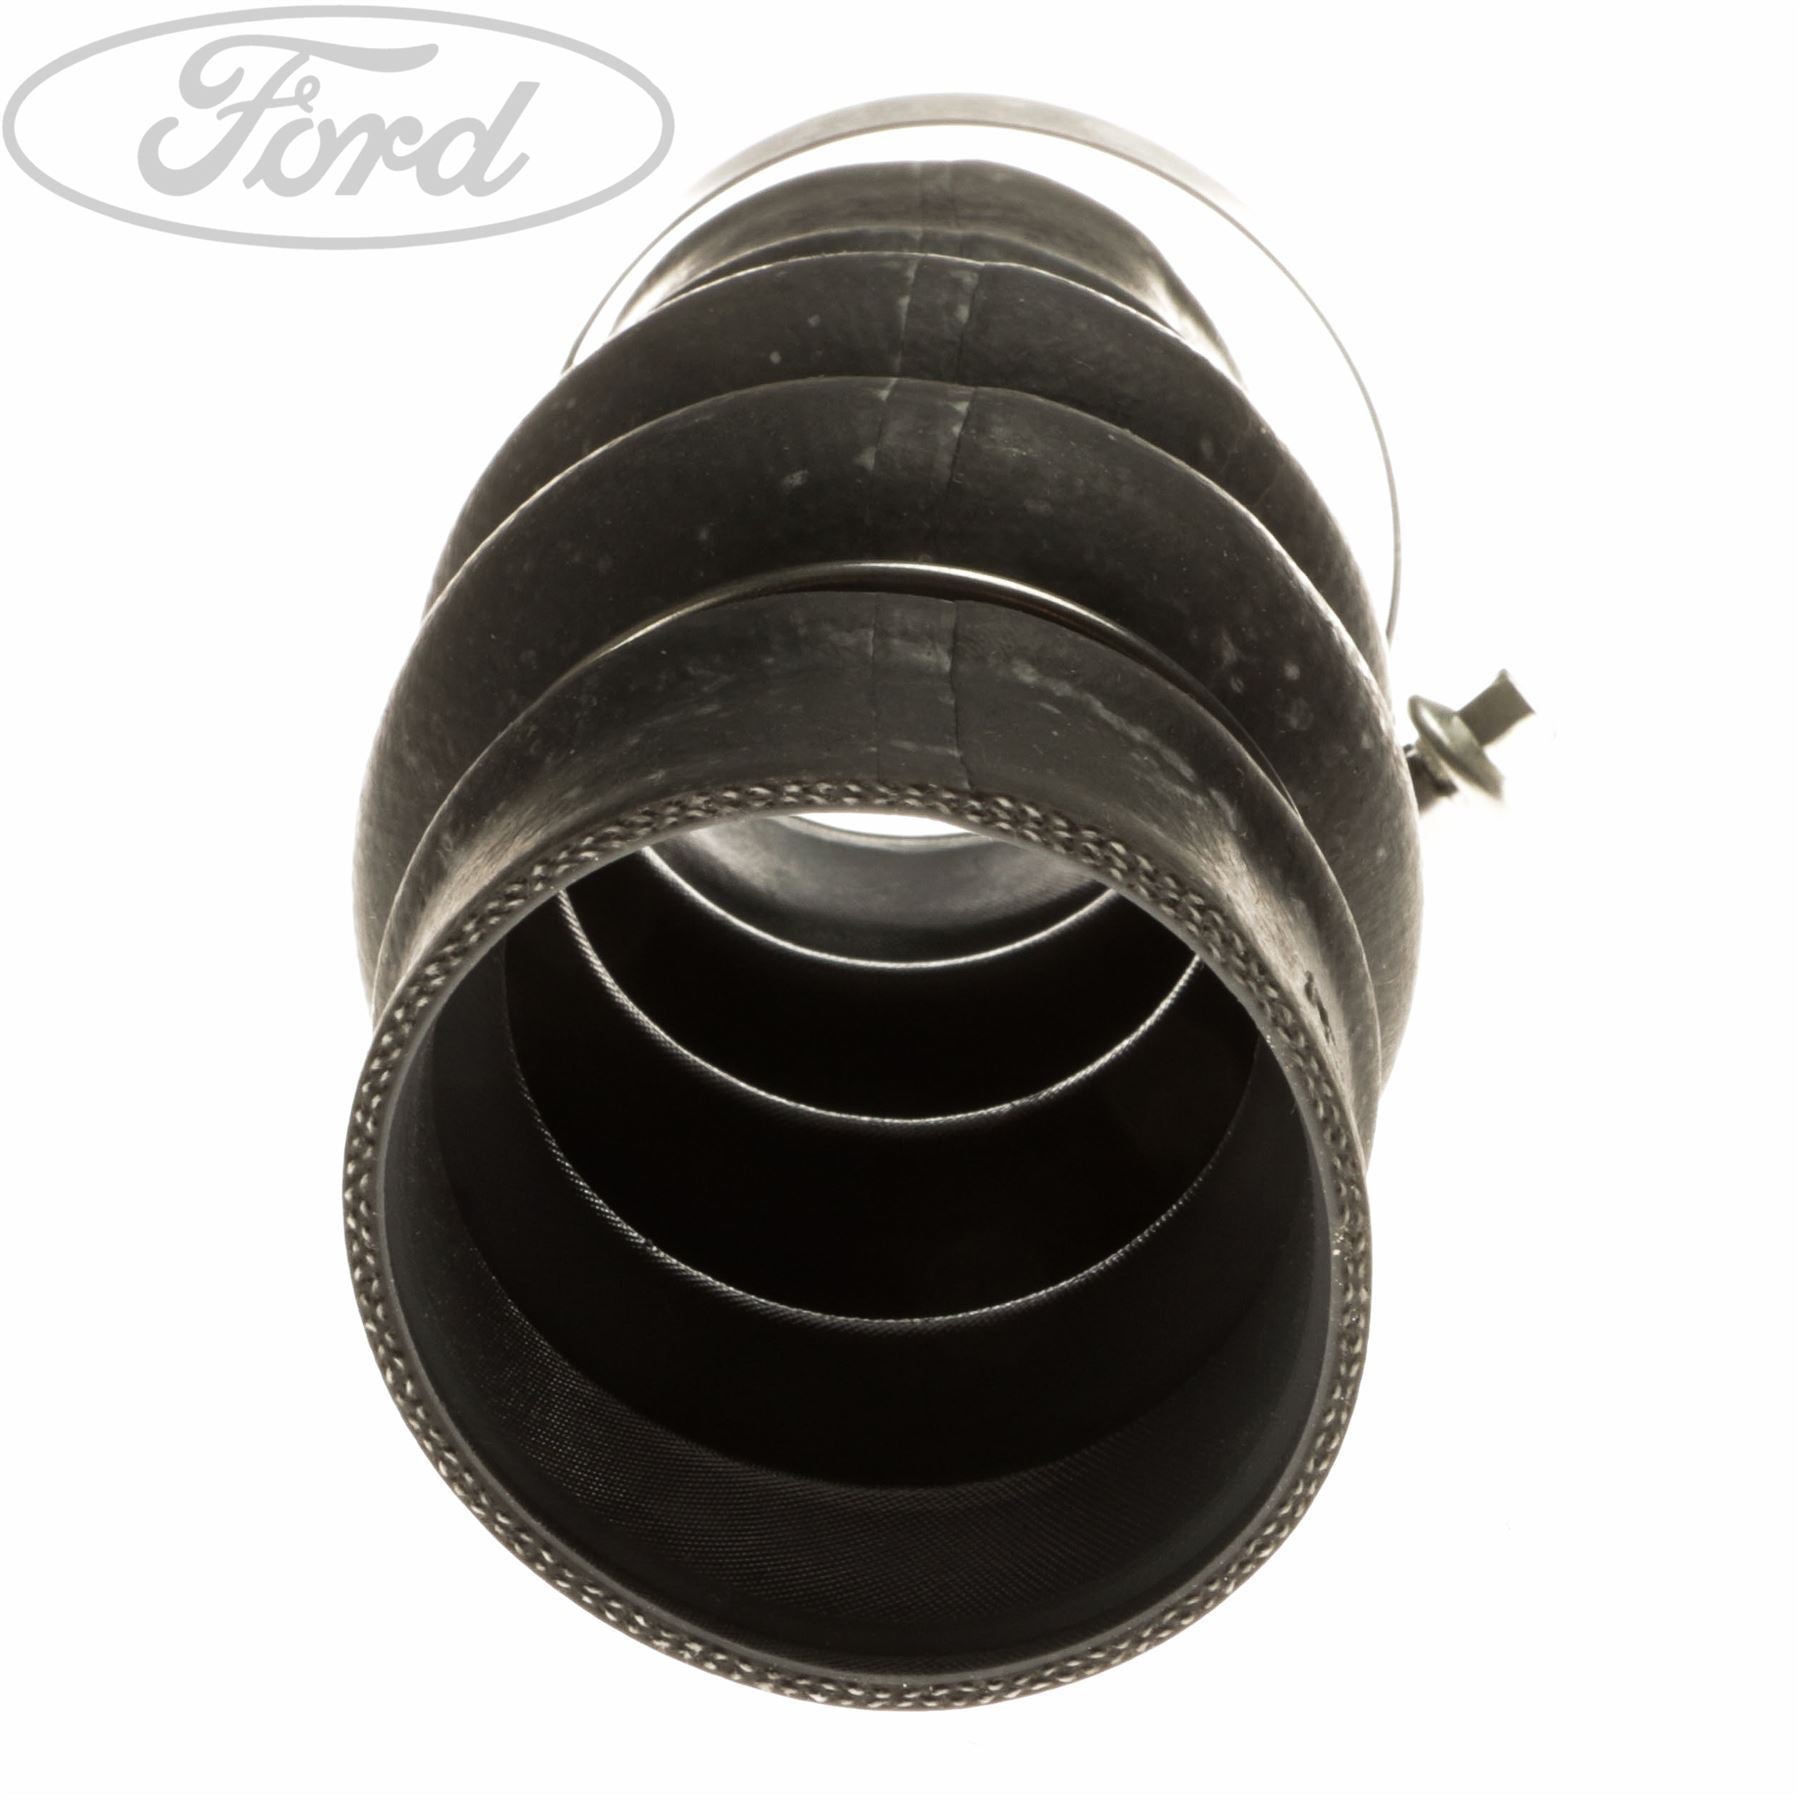 Turbo-Ladeluftschlauch For Ford Mondeo 2.0 TDCI BITUBO 210 HP E1G3-6C646-FA